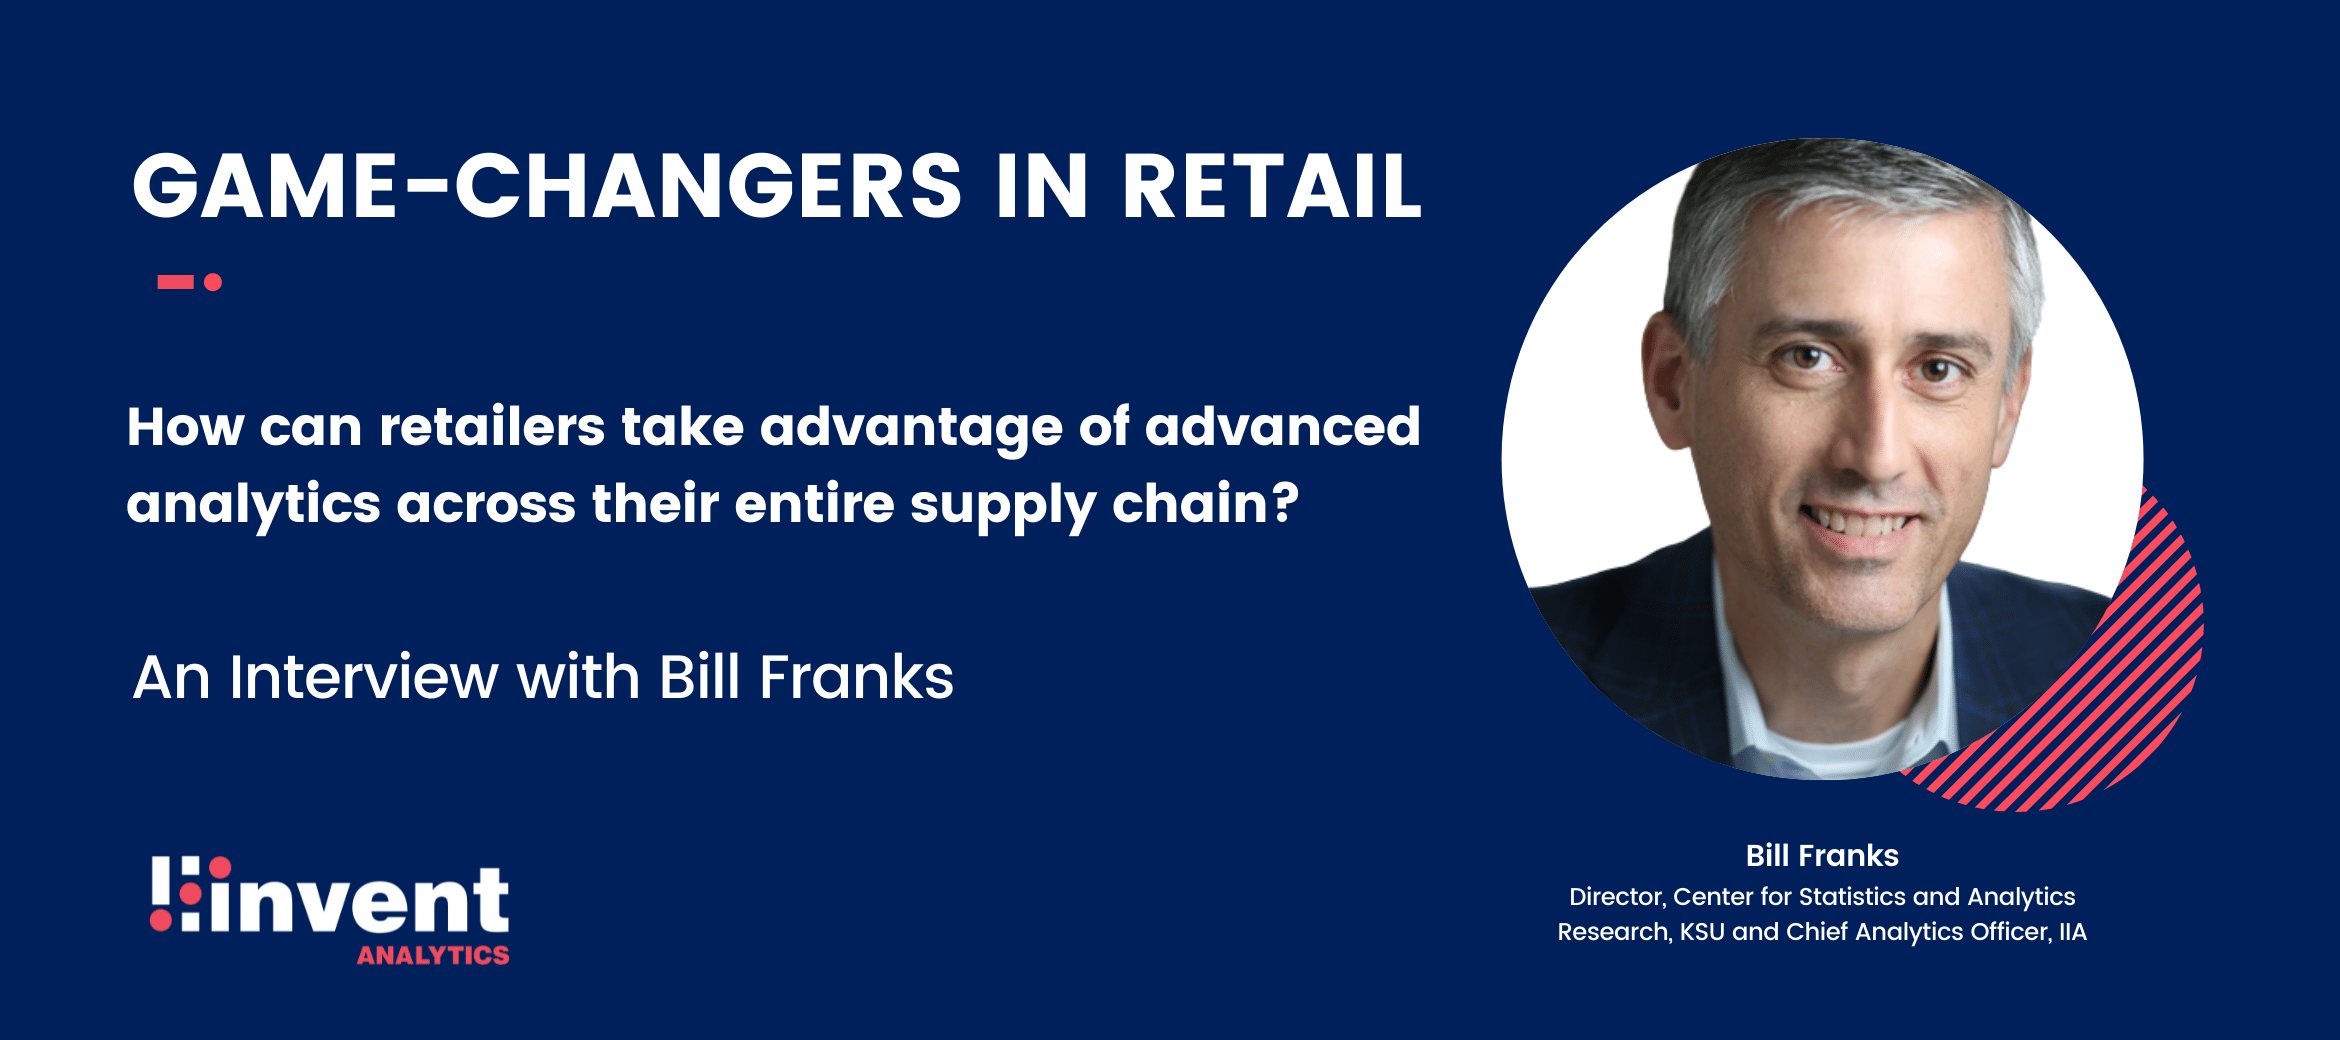 Game-changers in retail Bill Franks